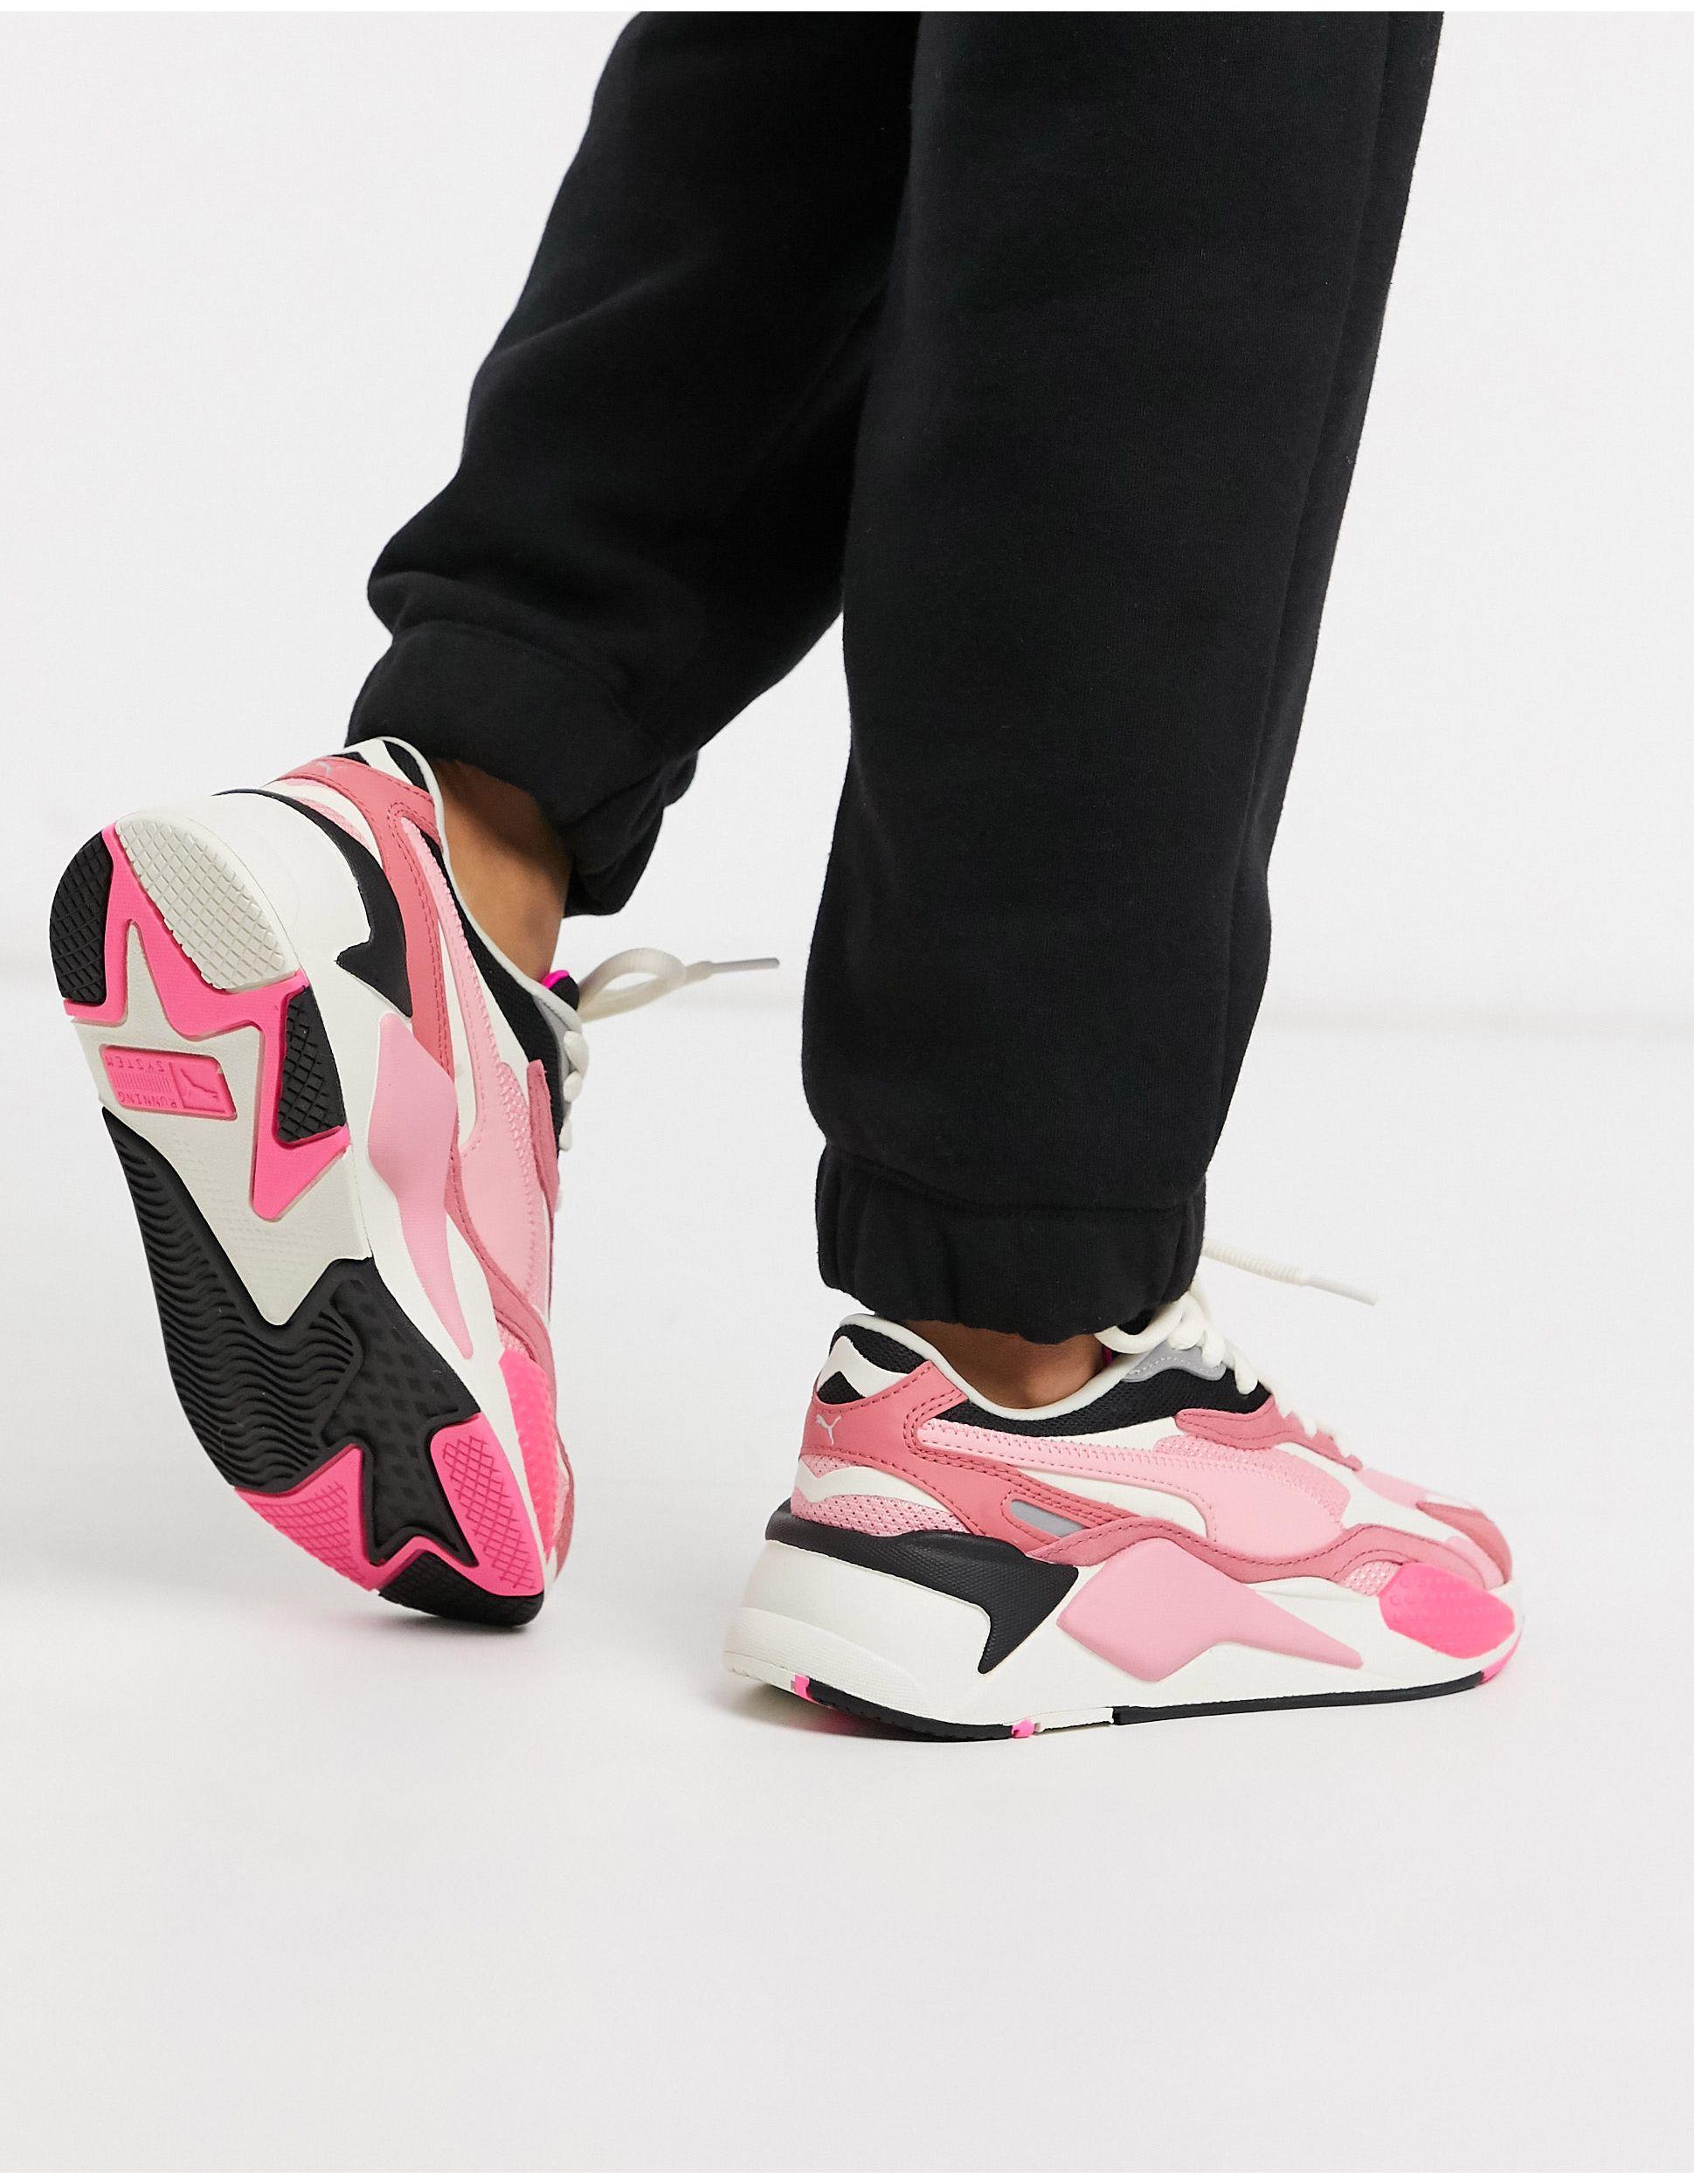 PUMA Leather Rs-x Cubed in Pink/Pink (Pink) - Save 68% - Lyst